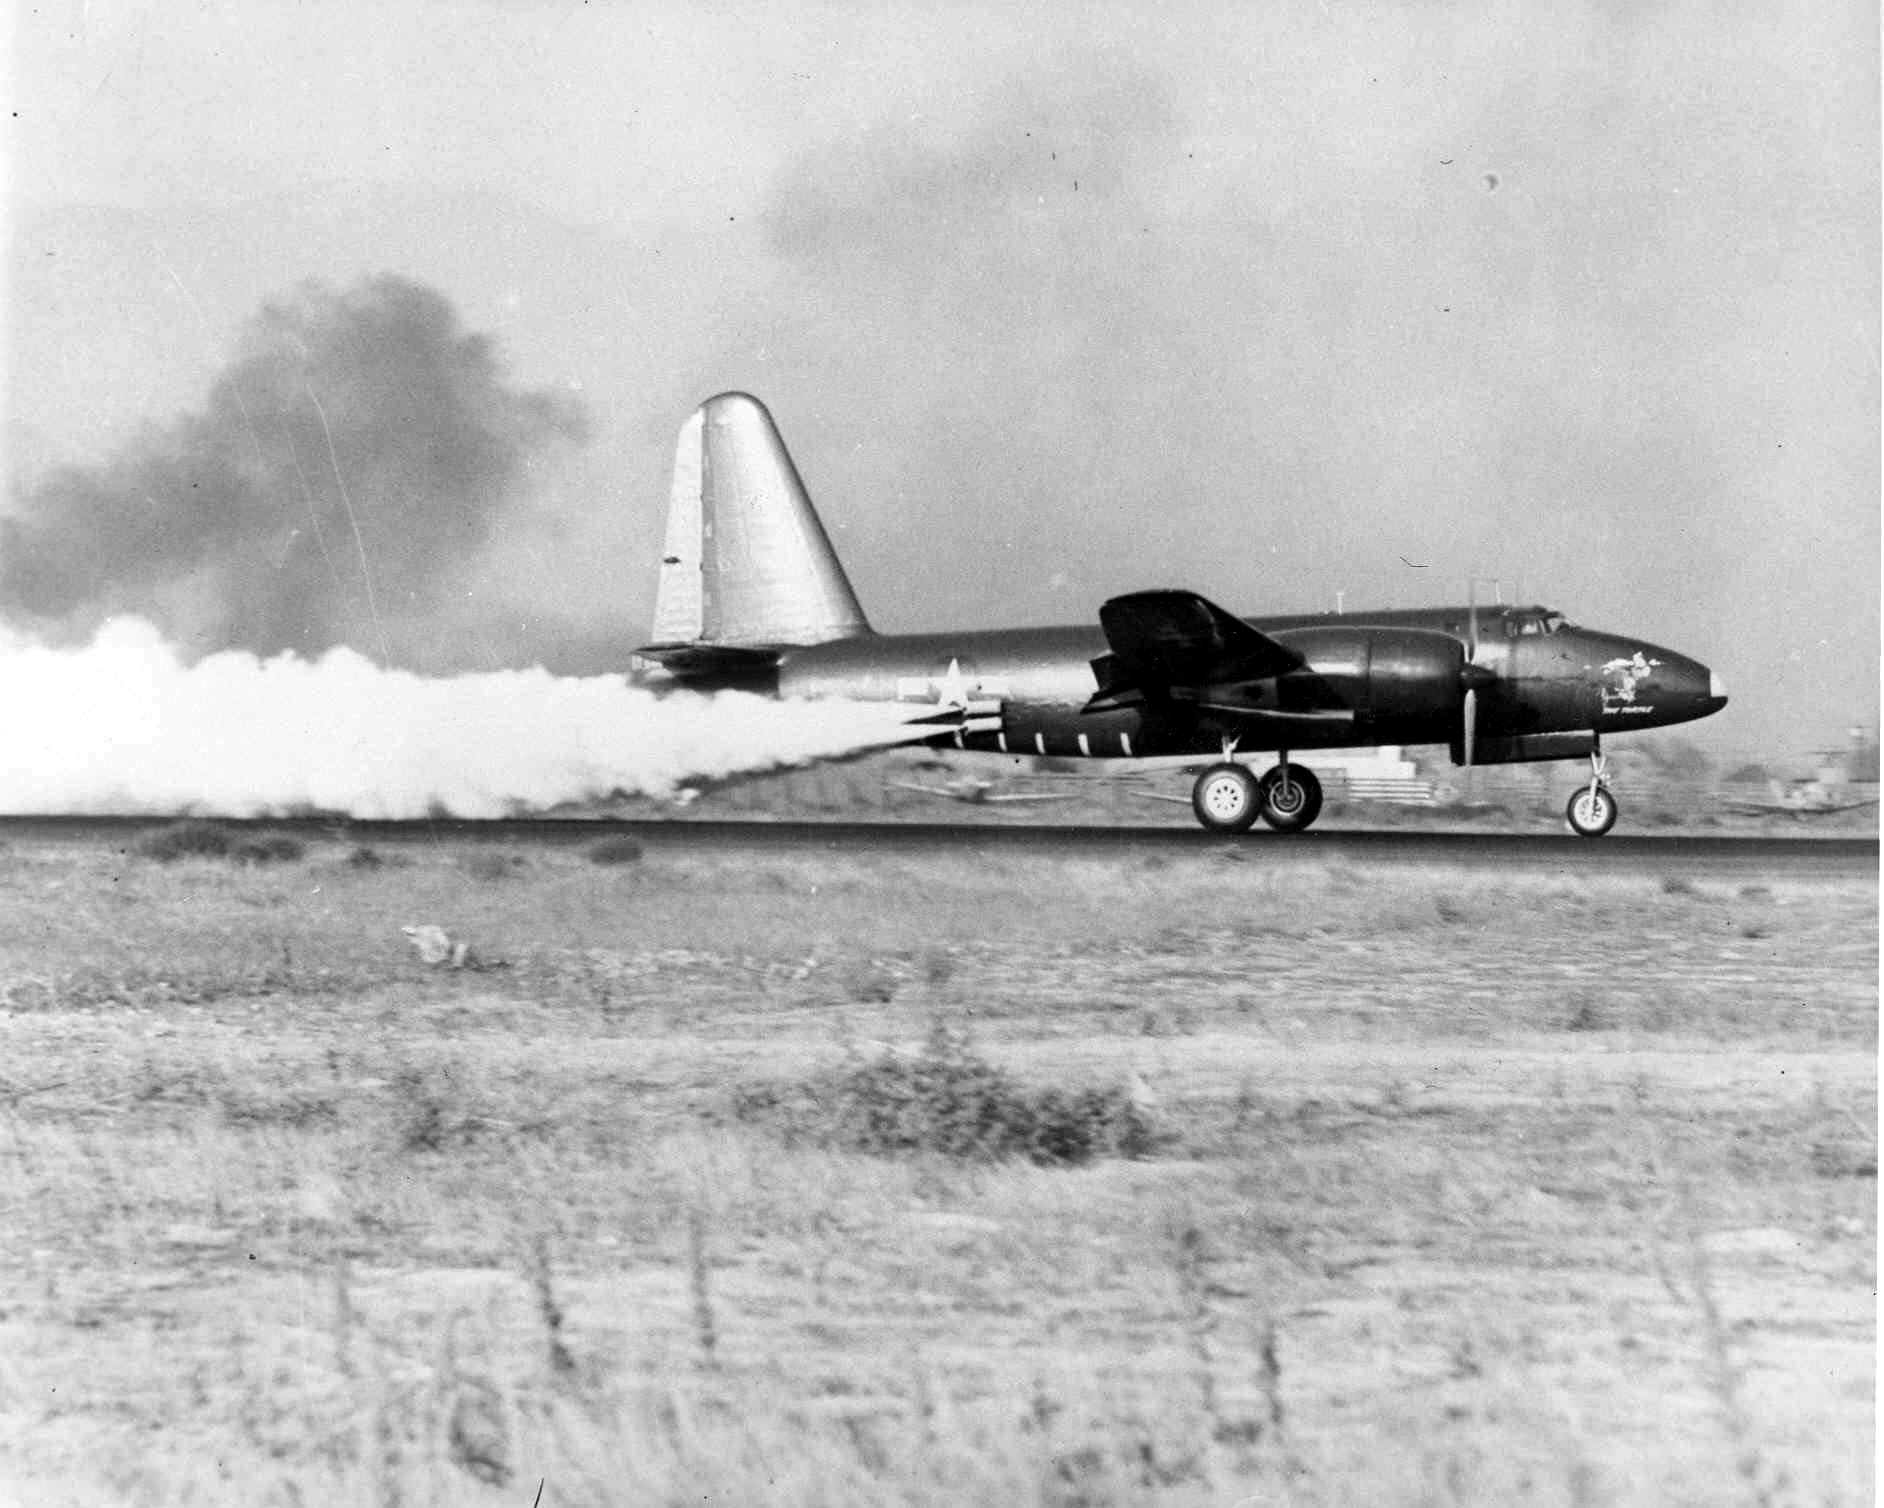 The Turtle, Lockheed P2V-1 Neptune Bu. No. 89082 demonstrates a JATO takeoff. The airplane is not carrying wingtip fuel tanks in this photograph. (U.S. Navy)